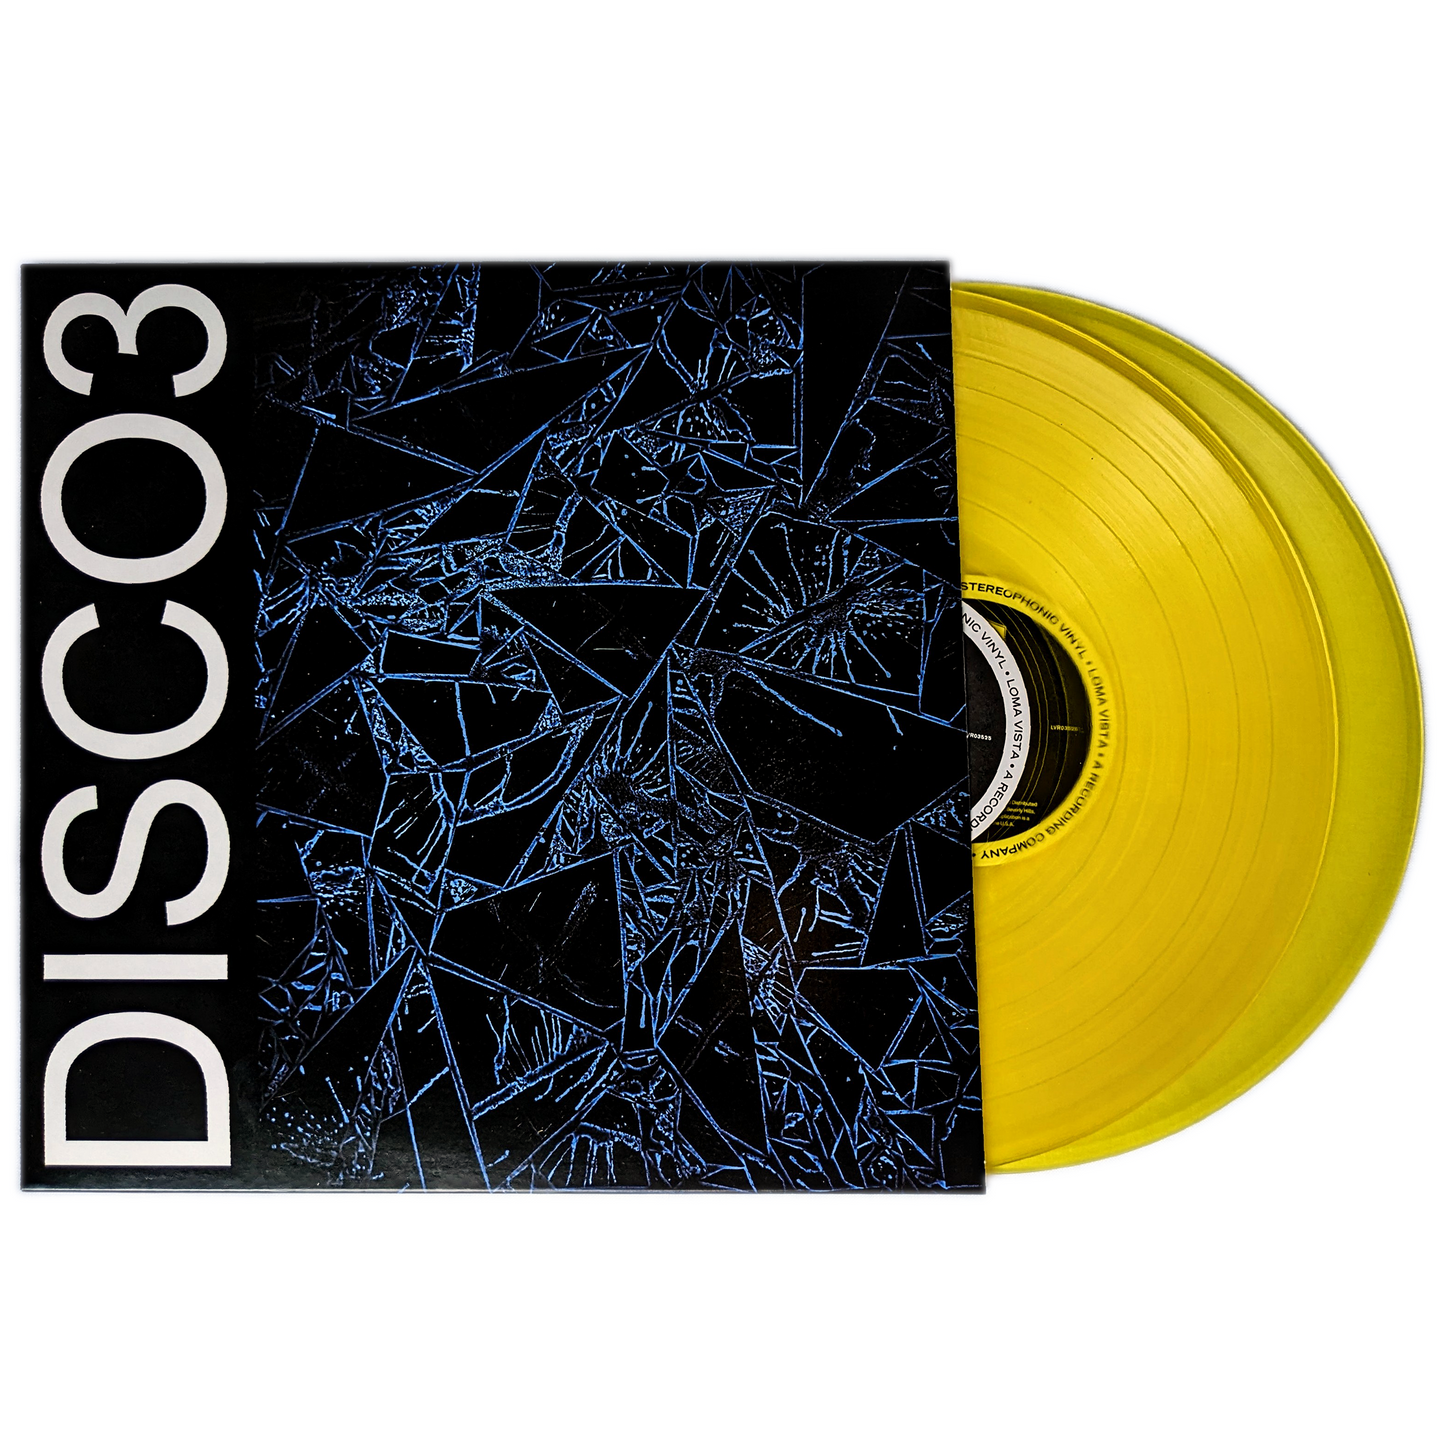 DISCO3 LIMITED EDITION LP